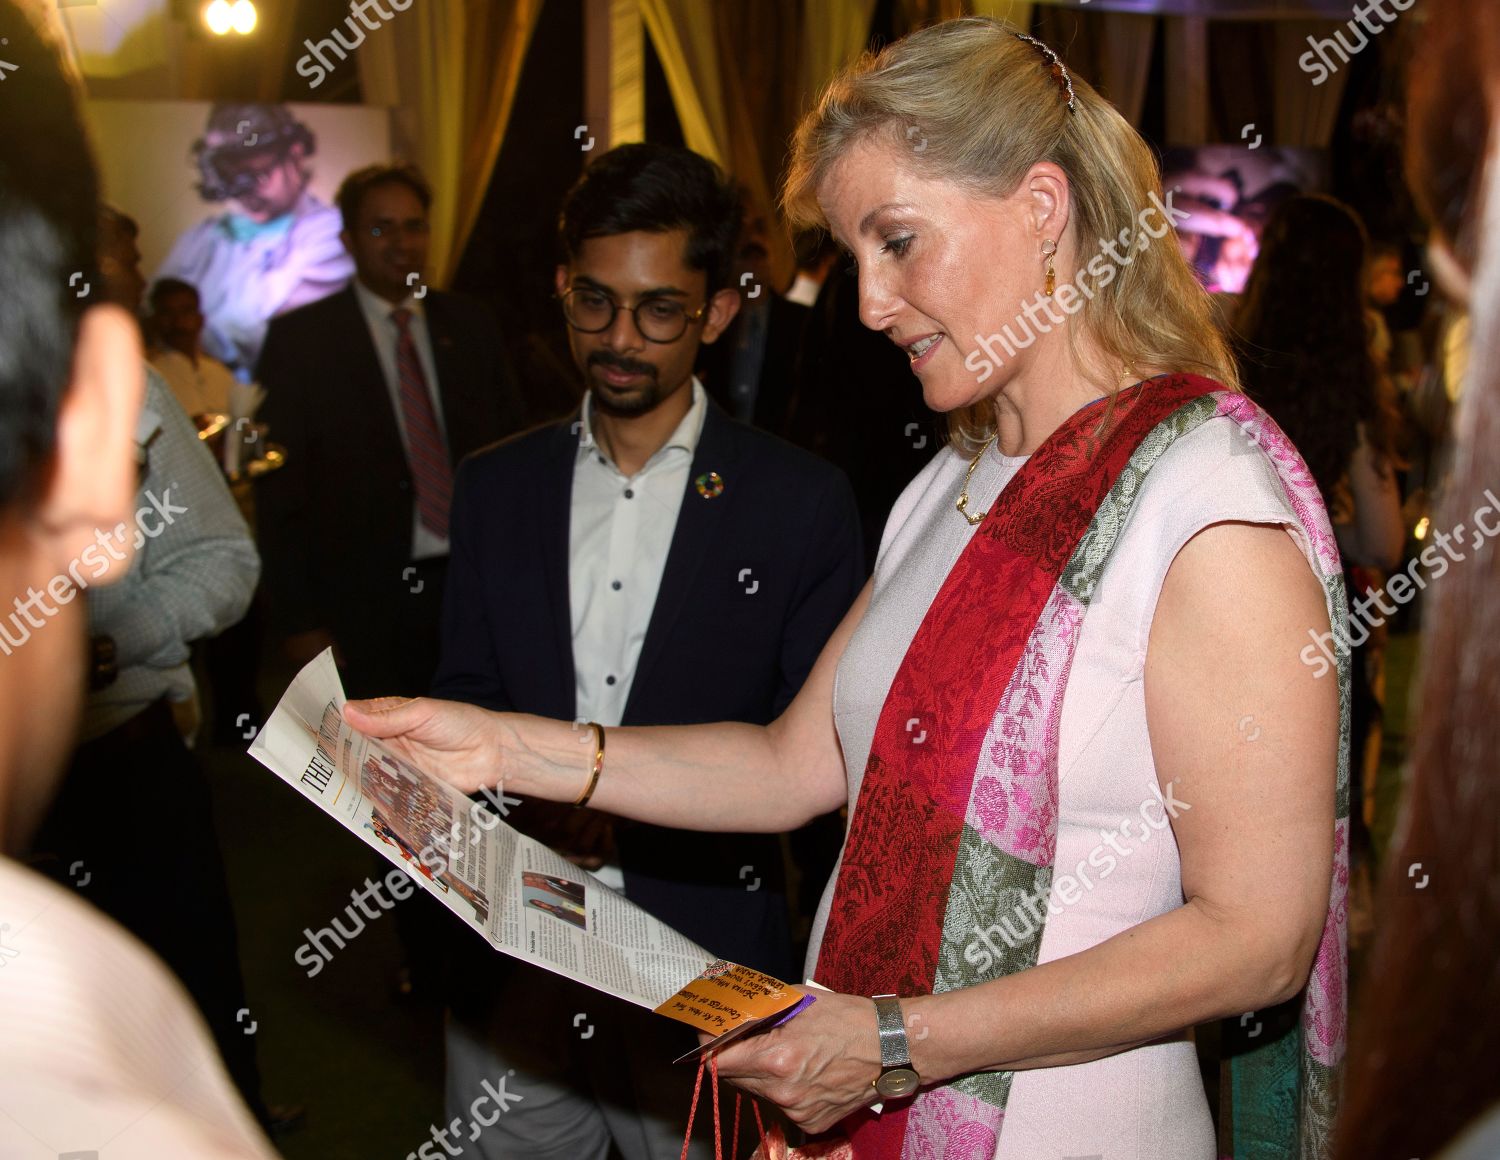 sophie-countess-of-wessex-visit-to-india-shutterstock-editorial-10226793o.jpg